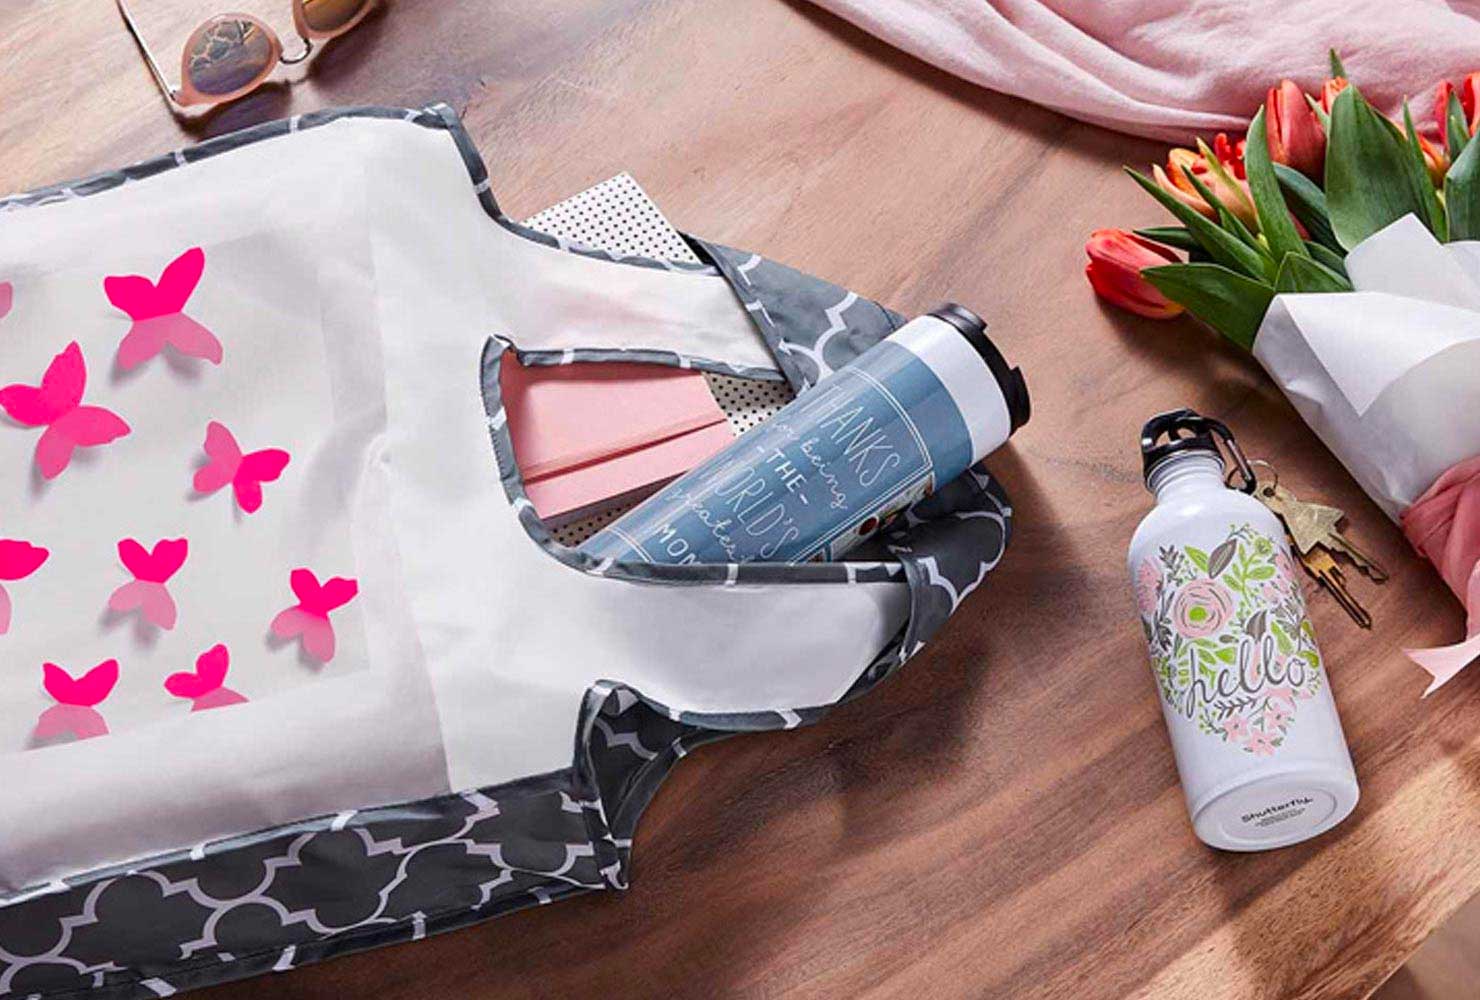 Reusable tote bag with resusable water bottle.